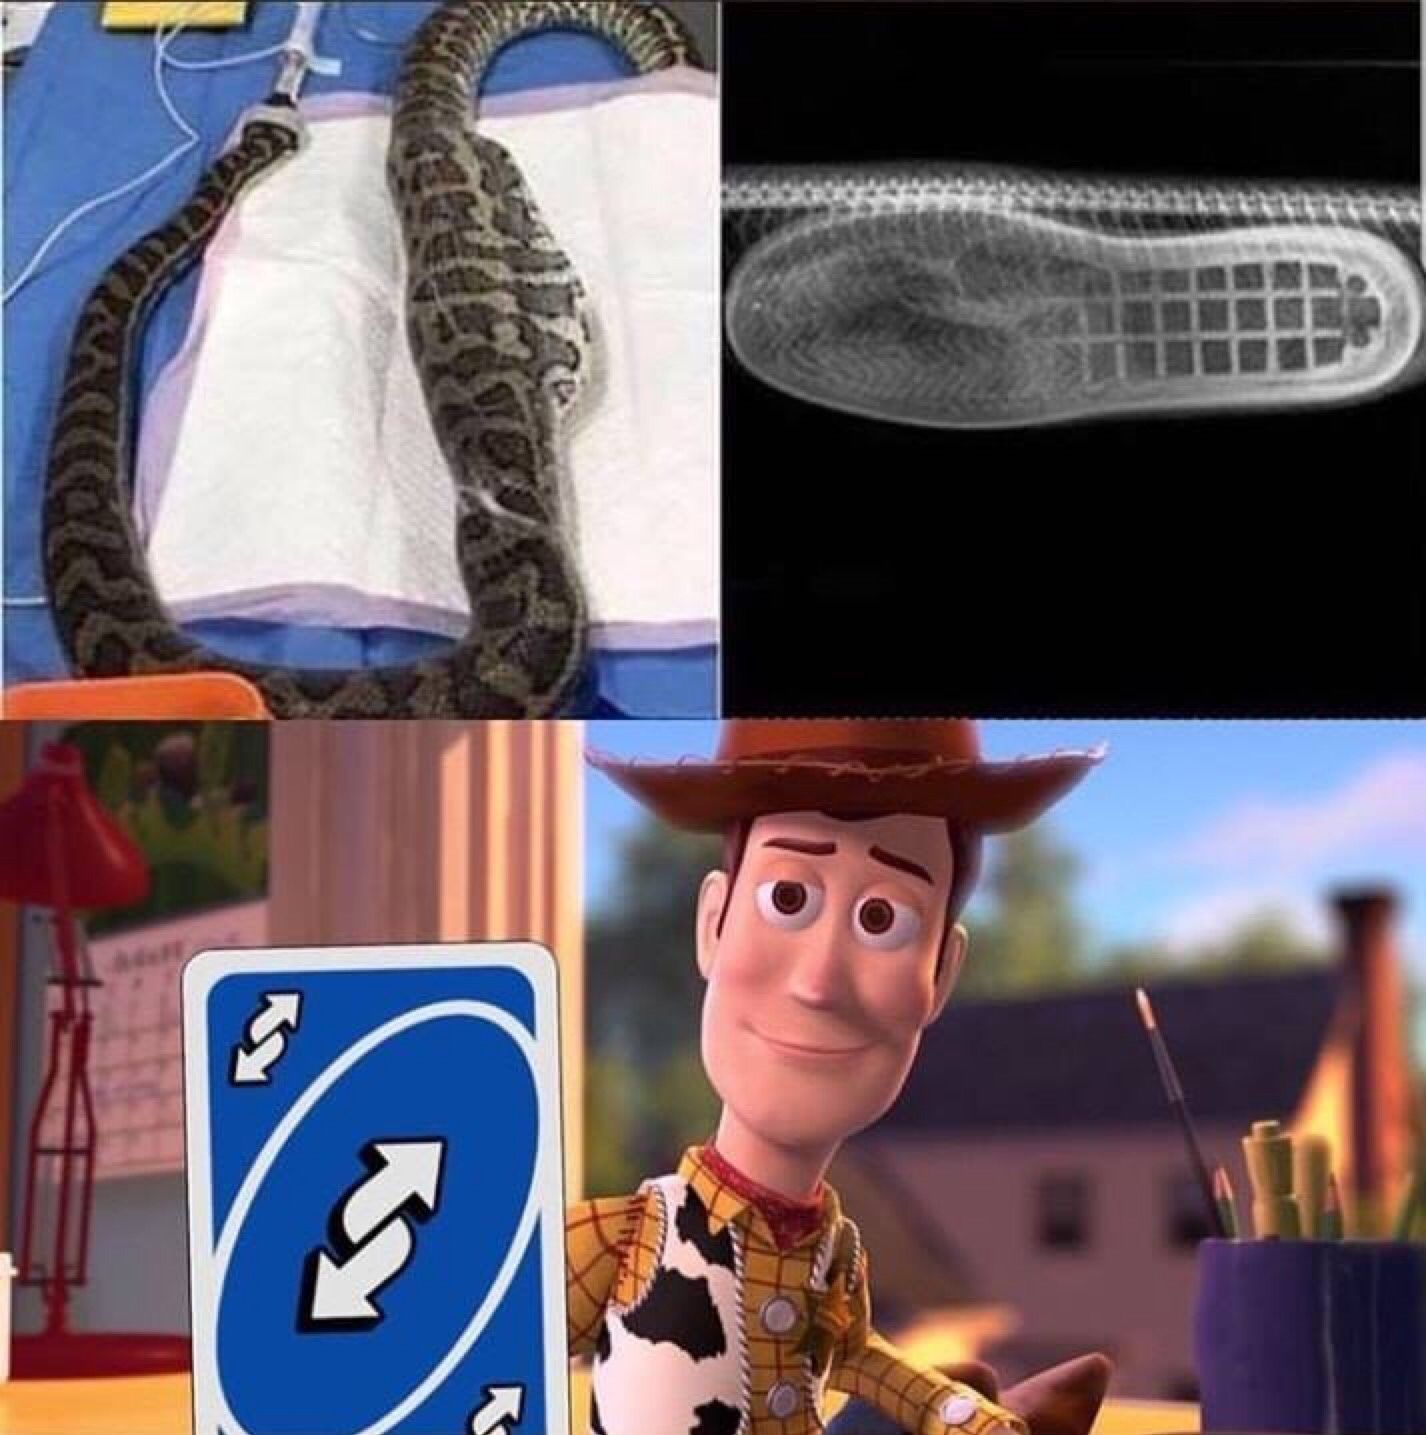 There's a boot in my snake